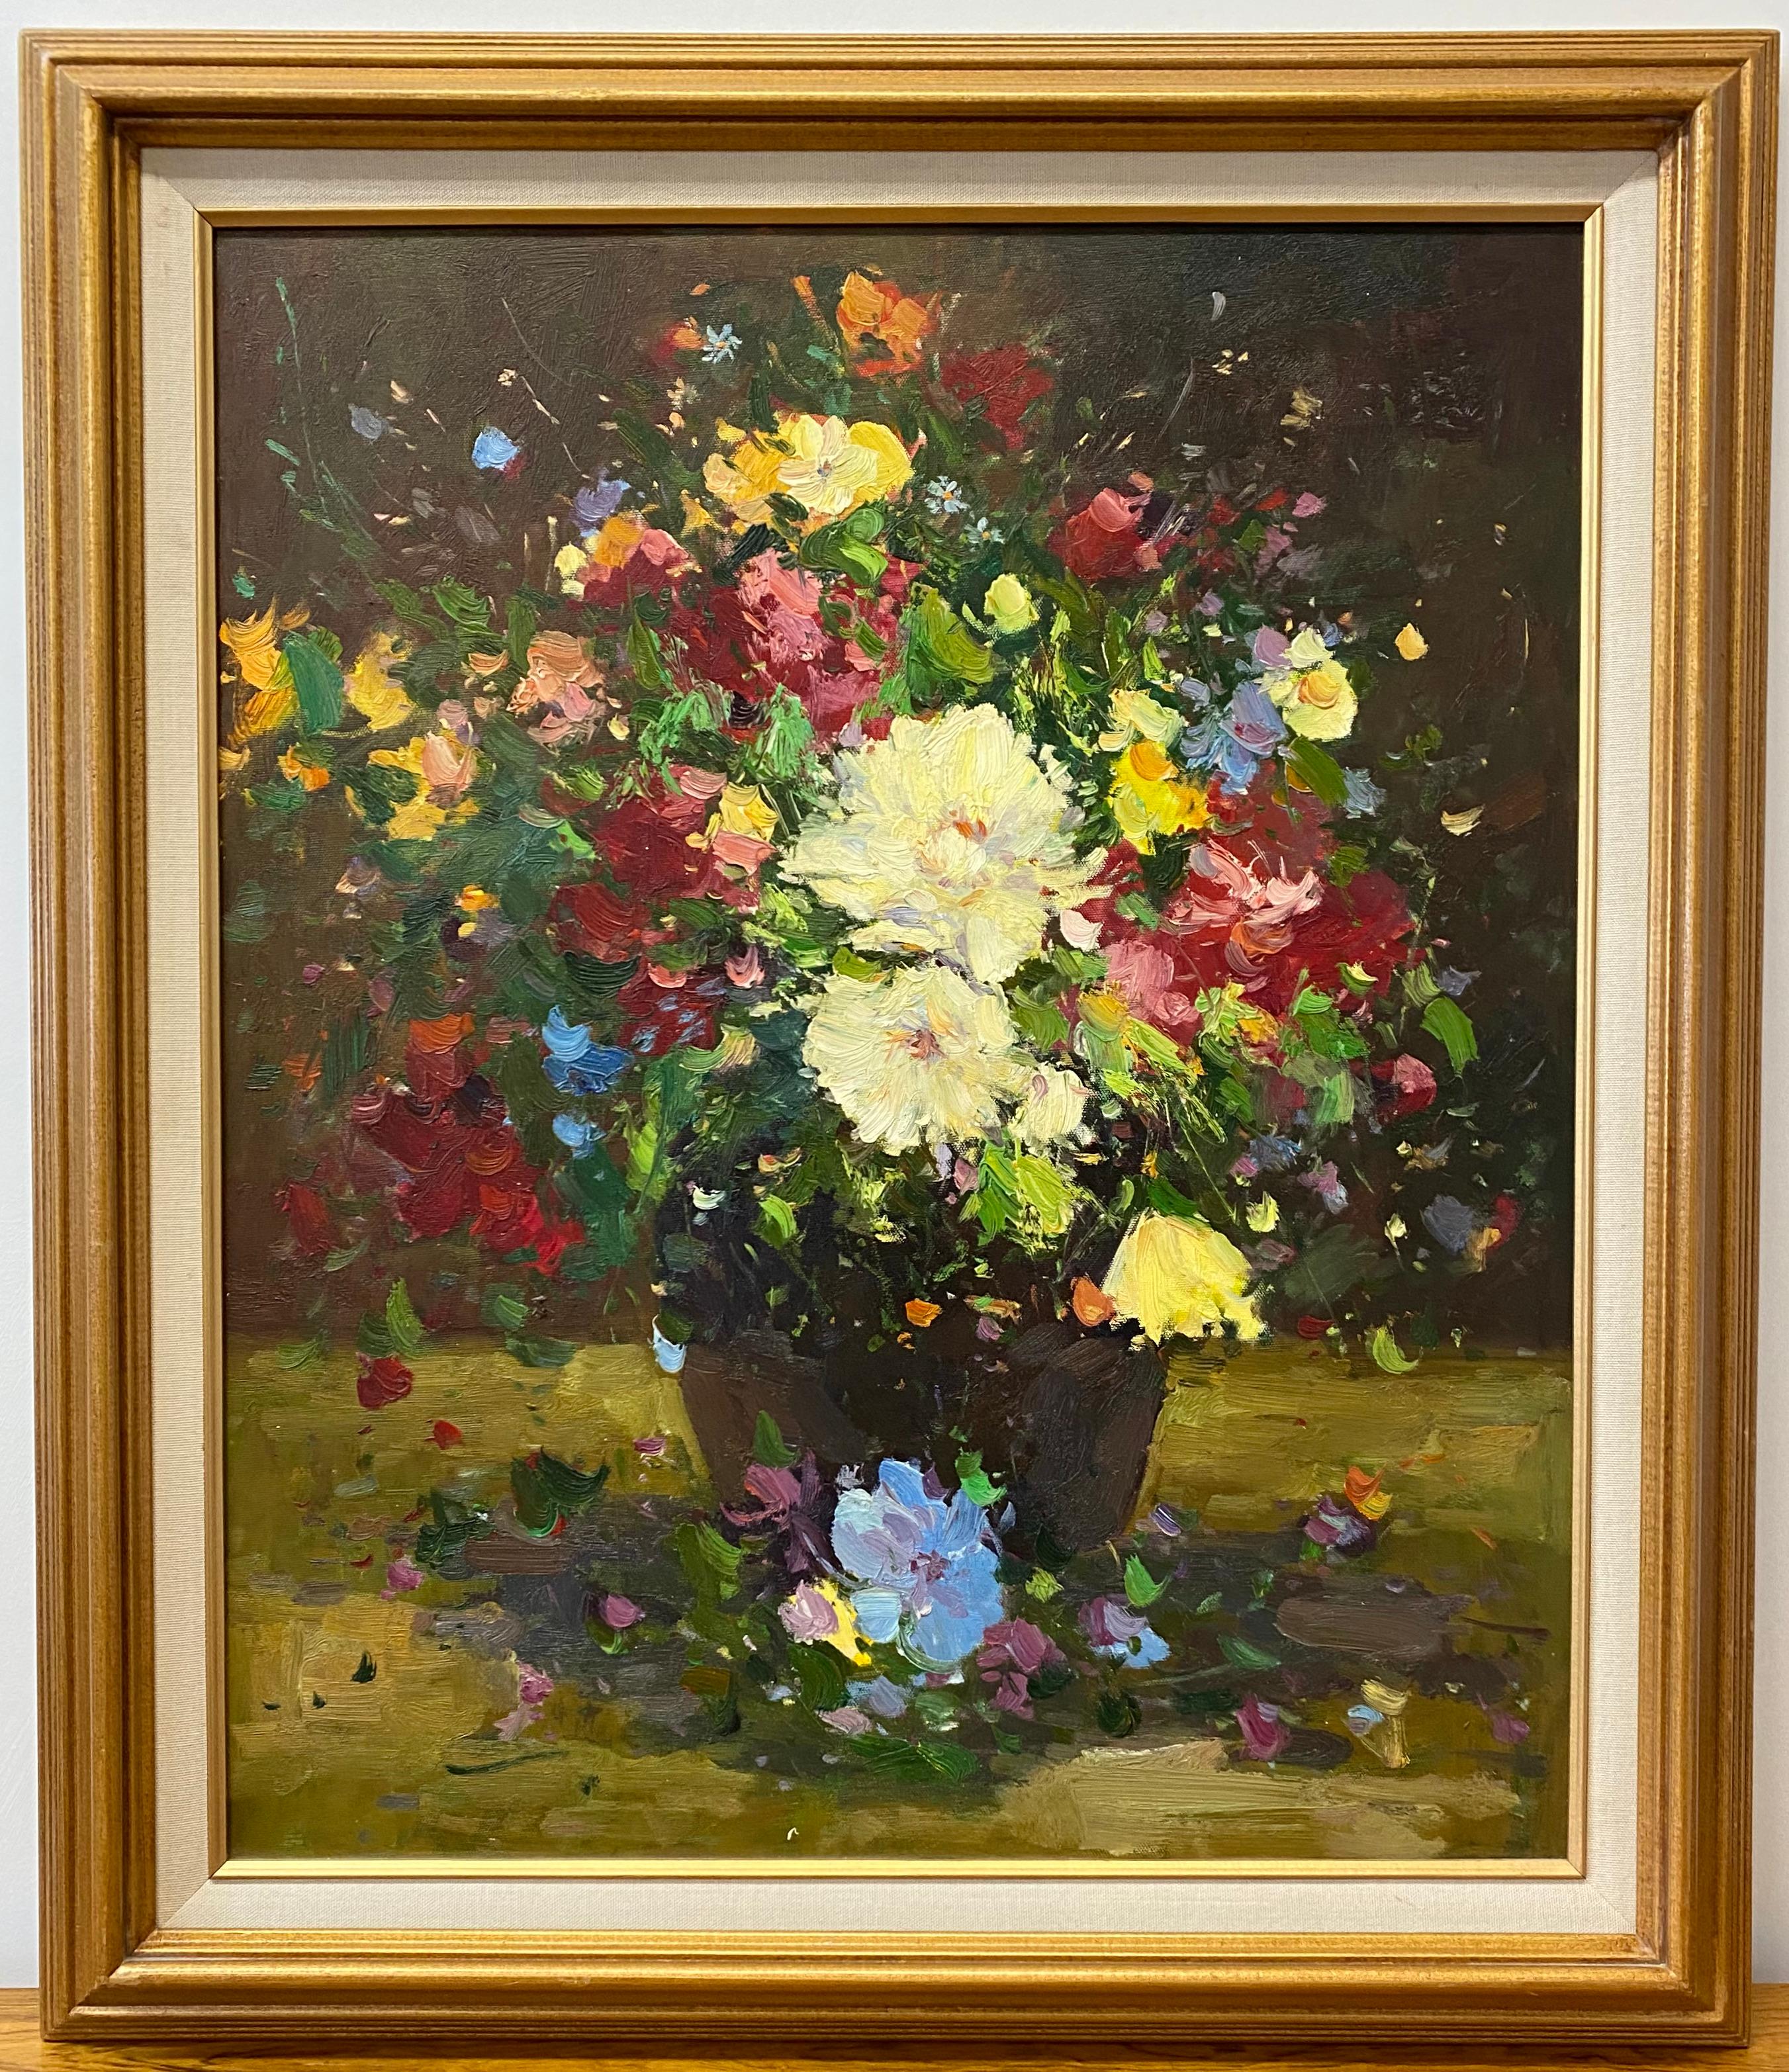 Contemporary Floral Still Life Oil Painting 21st Century